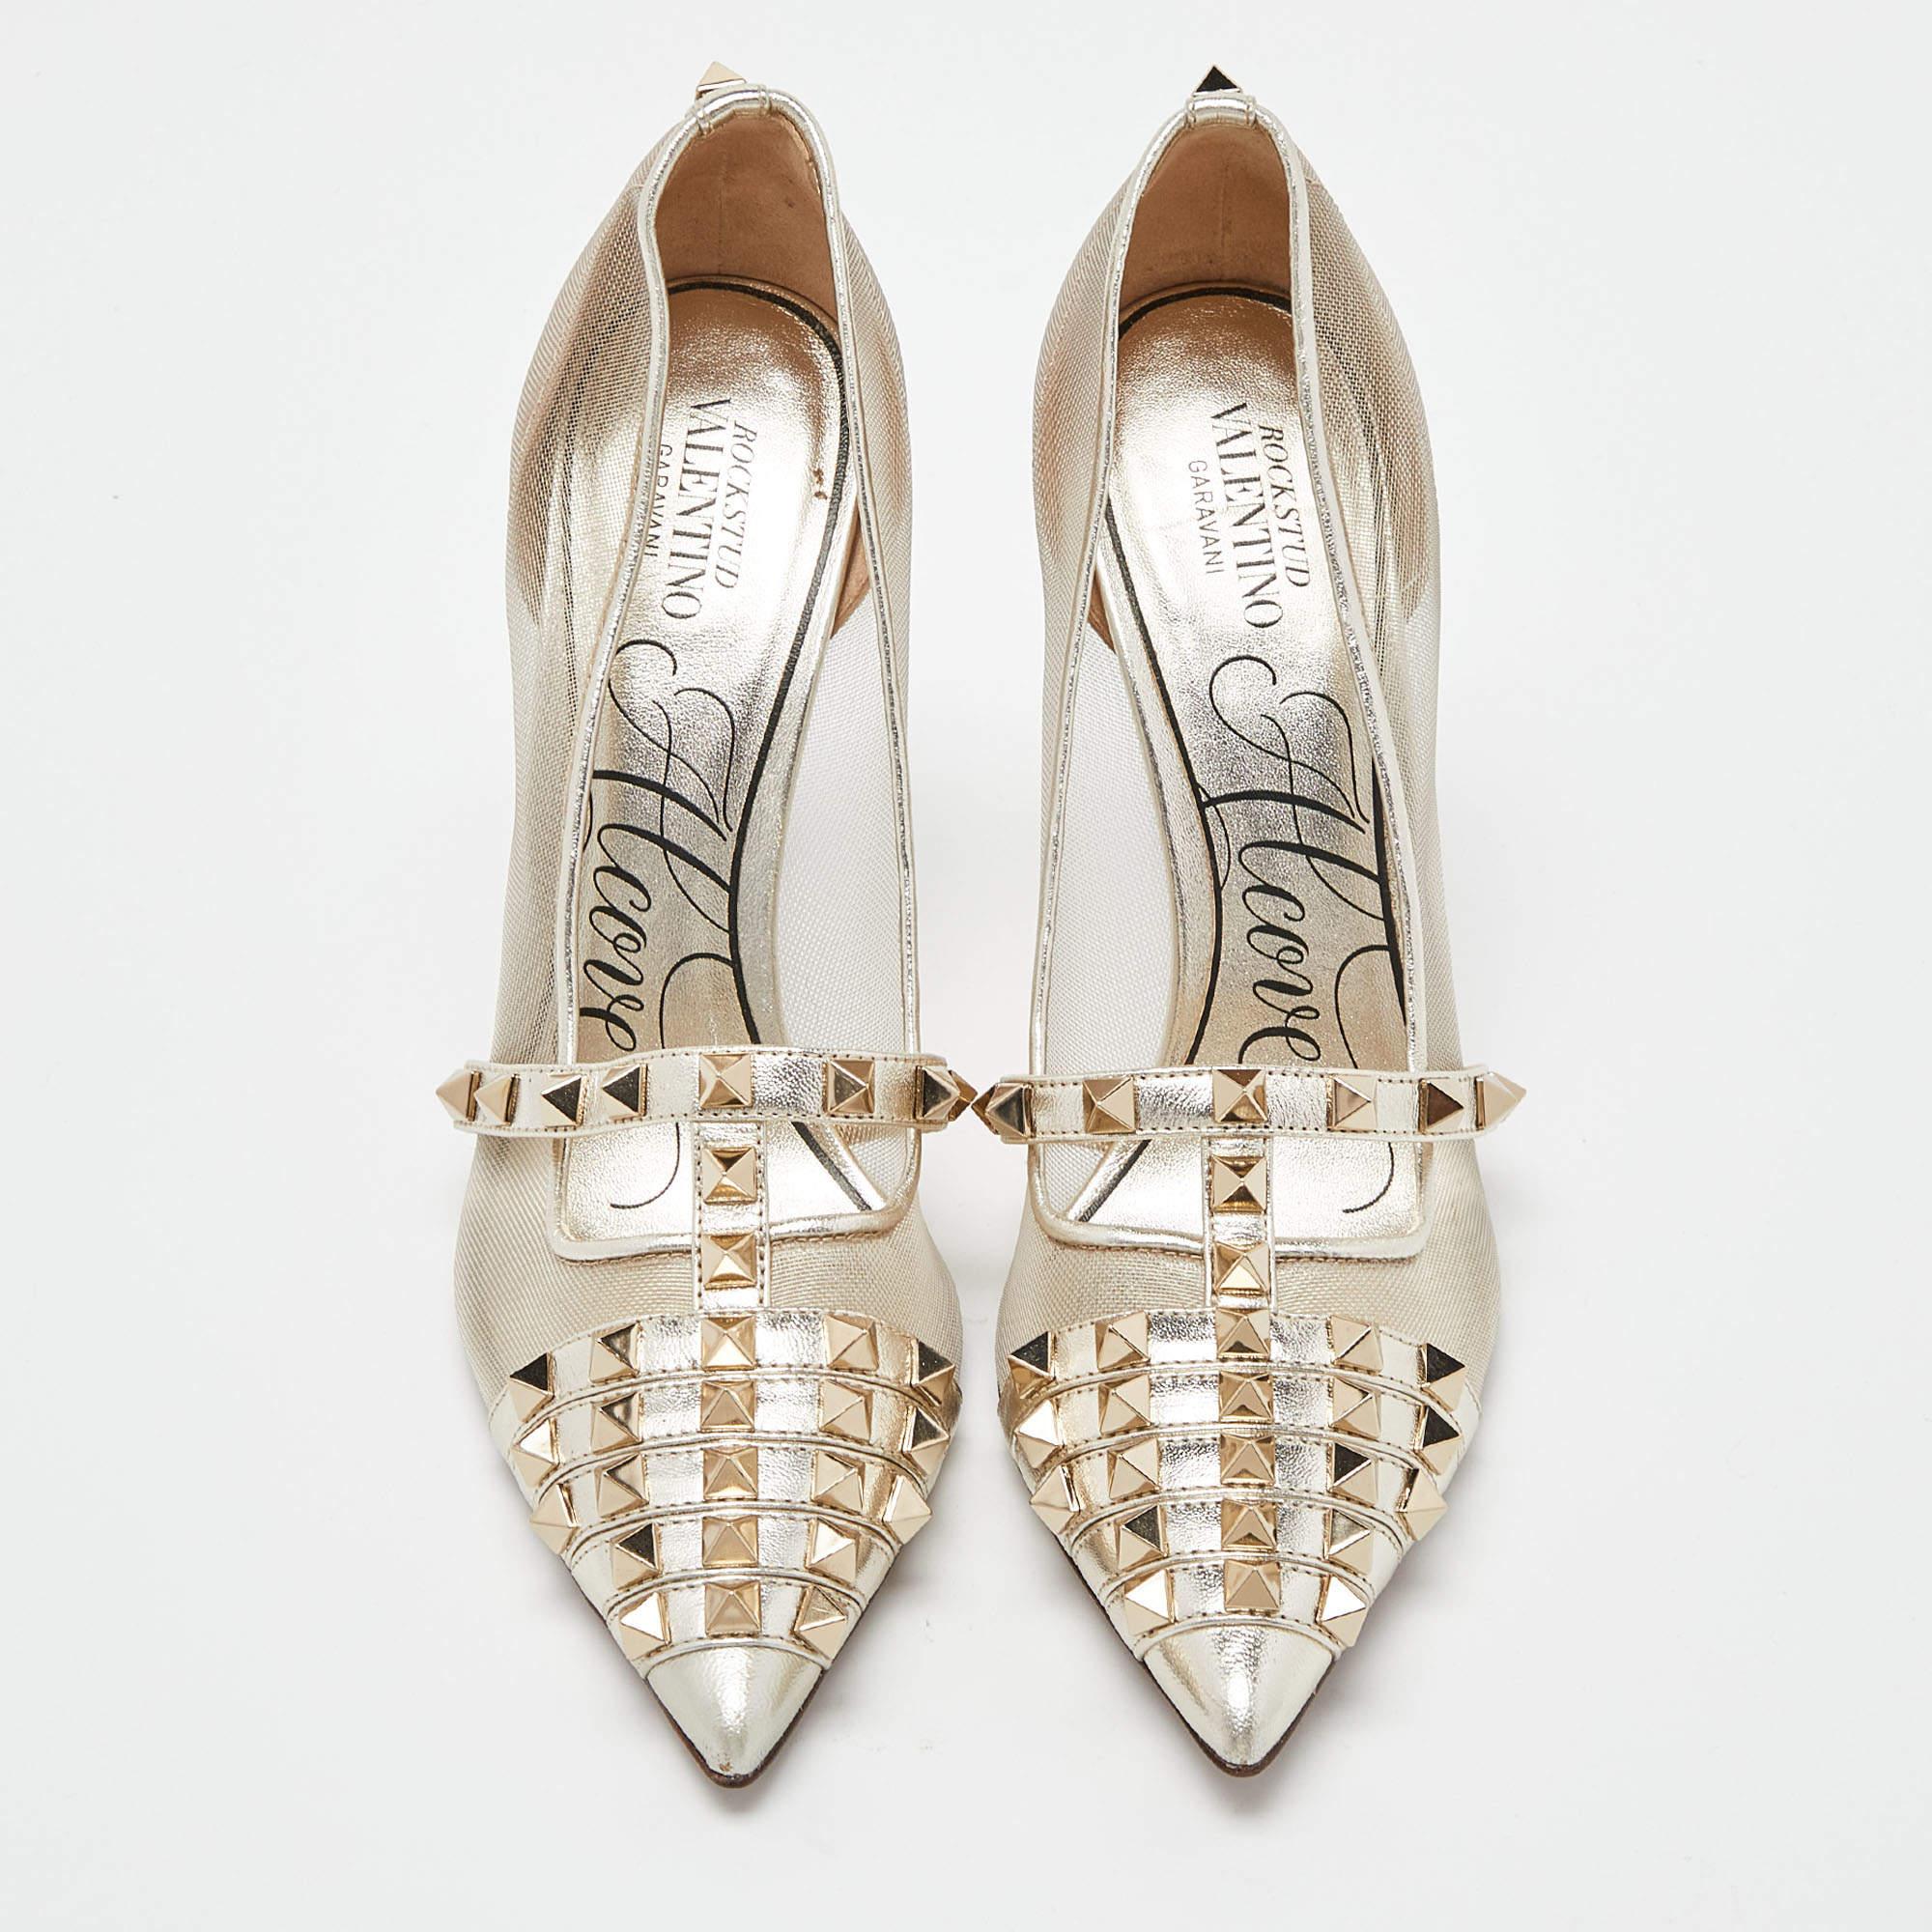 Wonderfully-crafted shoes added with notable elements to fit well and pair perfectly with all your plans. Make these Valentino x Alcove pumps yours today!

Includes:  Original Dustbag, Original Box, Extra Tips, Info Booklet, Invoice

